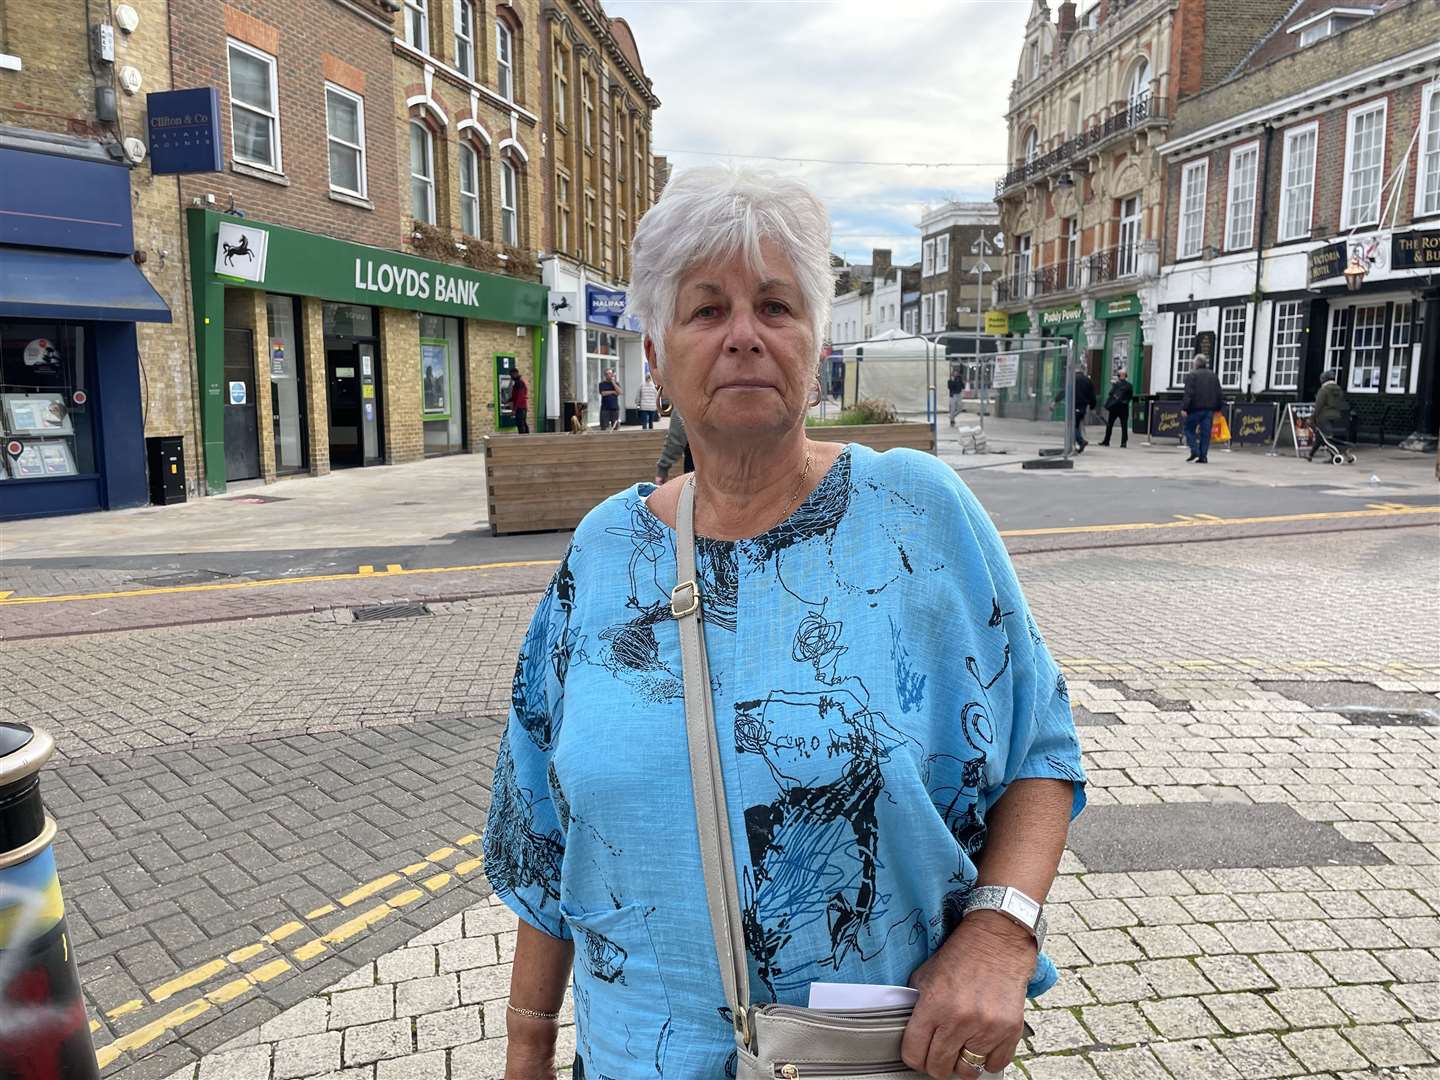 Dartford resident Valerie Hall is unhappy with the government and wanted Boris Johnson back although he is a 'buffoon'